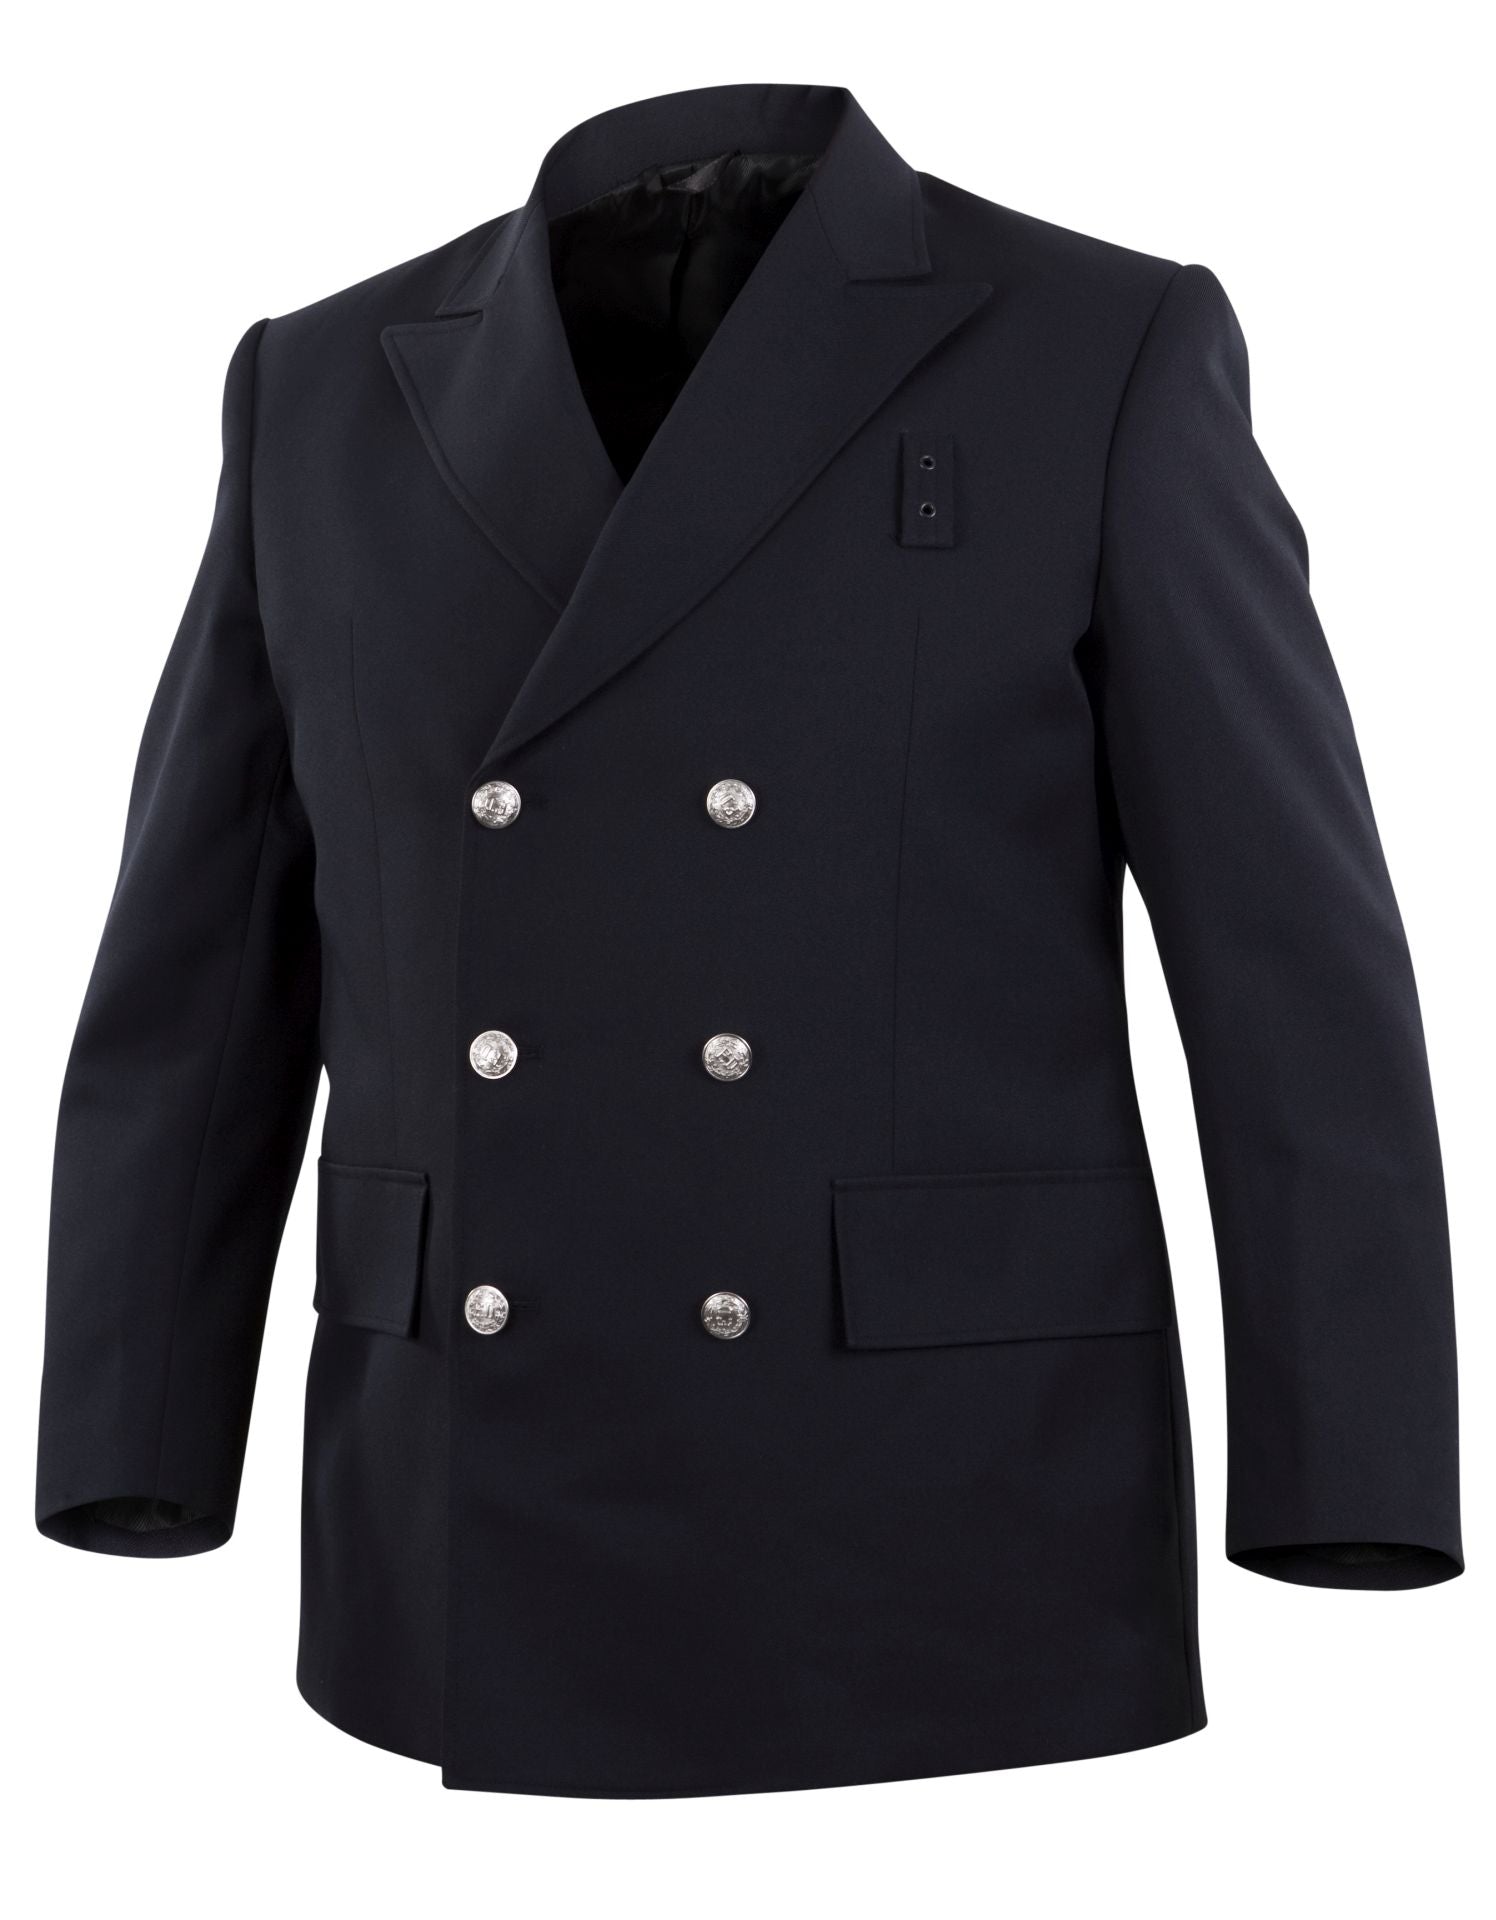 Top Authority Double-Breasted 2-Pocket Blousecoat-